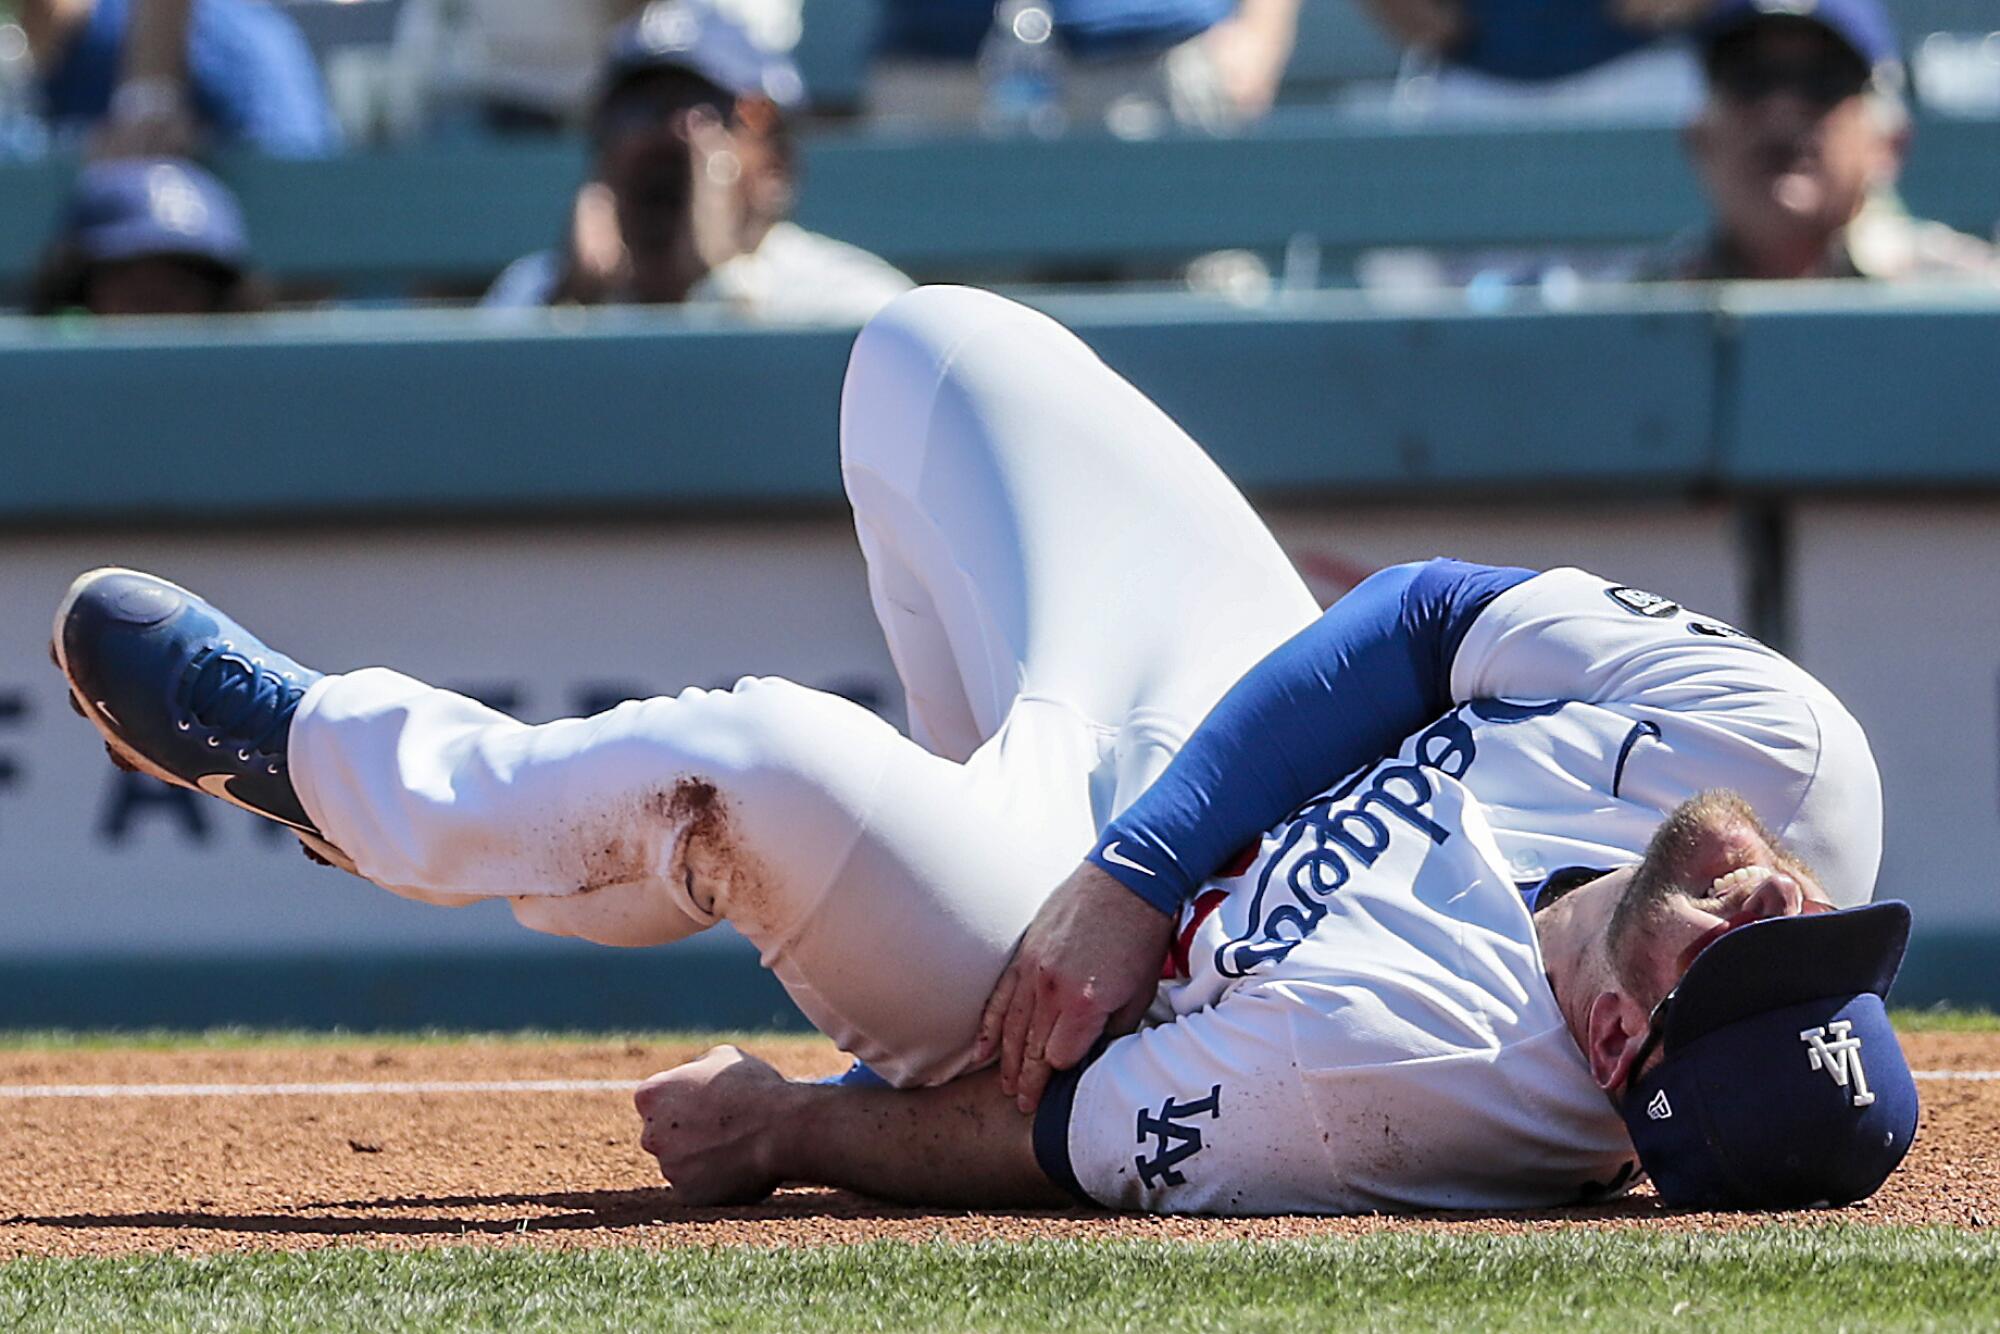 A baseball player lies on the ground, holding his arm as he grimaces 